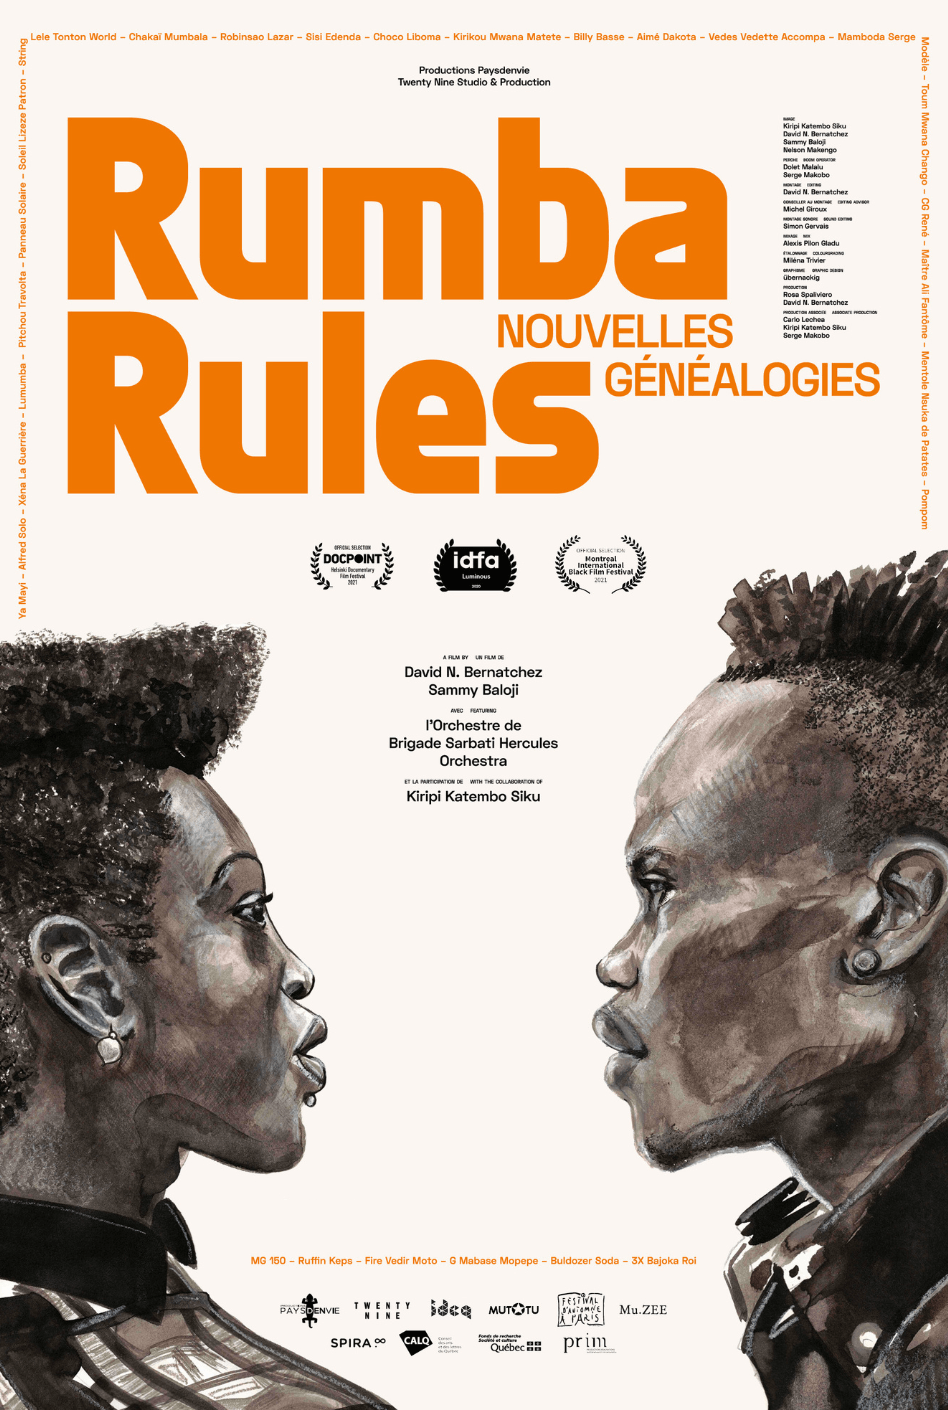 images/bottin_films/f21bc3ad45432032af6437e0157eff22-Rumba-Rules-affiche-poster.png#joomlaImage://local-images/bottin_films/f21bc3ad45432032af6437e0157eff22-Rumba-Rules-affiche-poster.png?width=948&height=1410